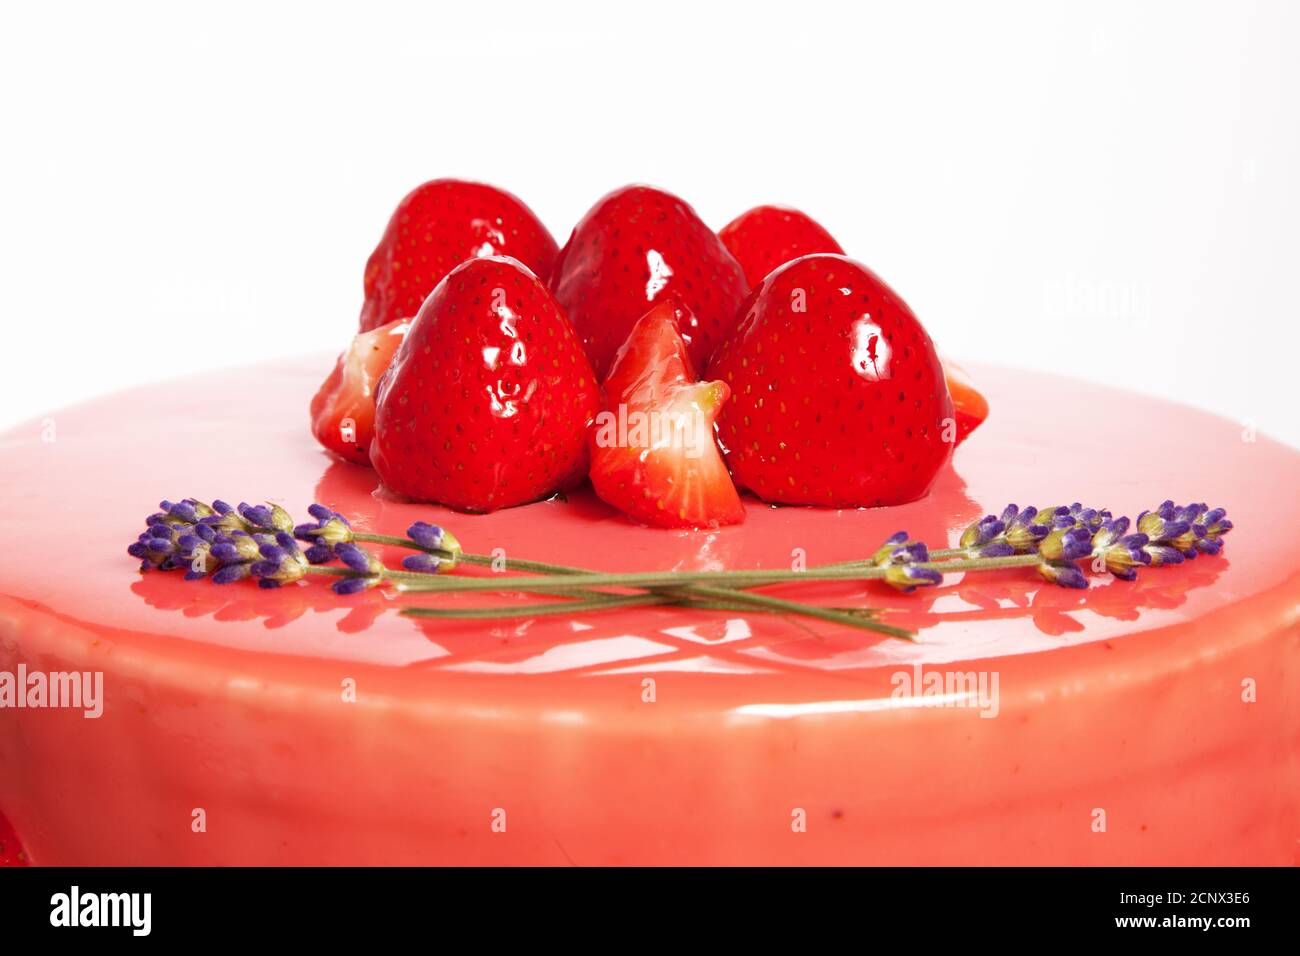 La Fraise High Resolution Stock Photography and Images - Alamy